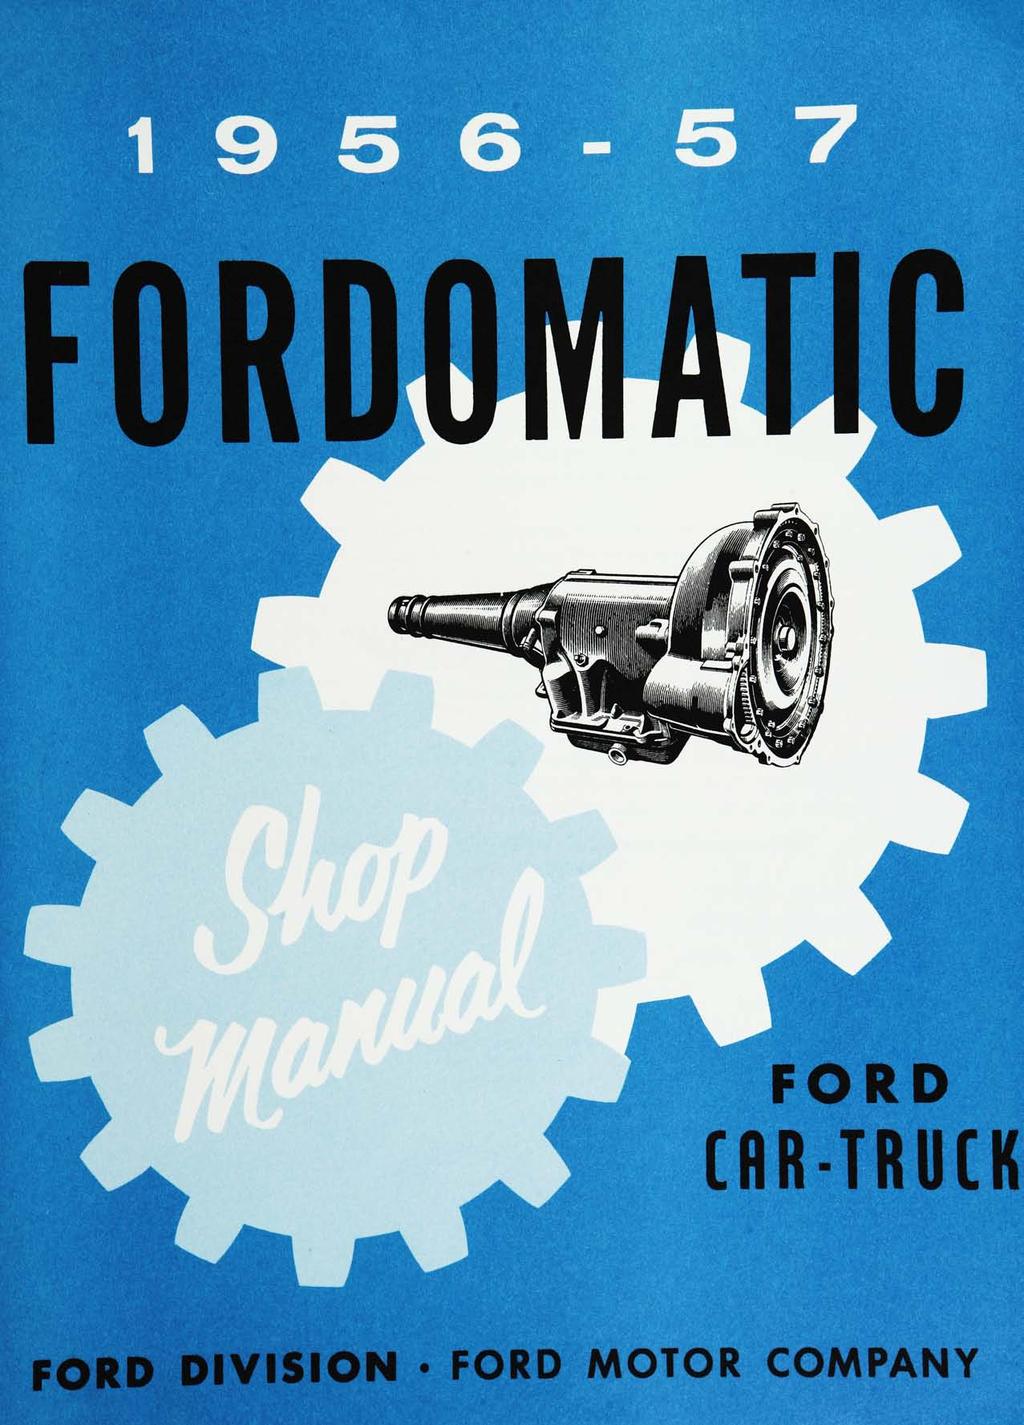 FORD CAR-TRUCK FORD